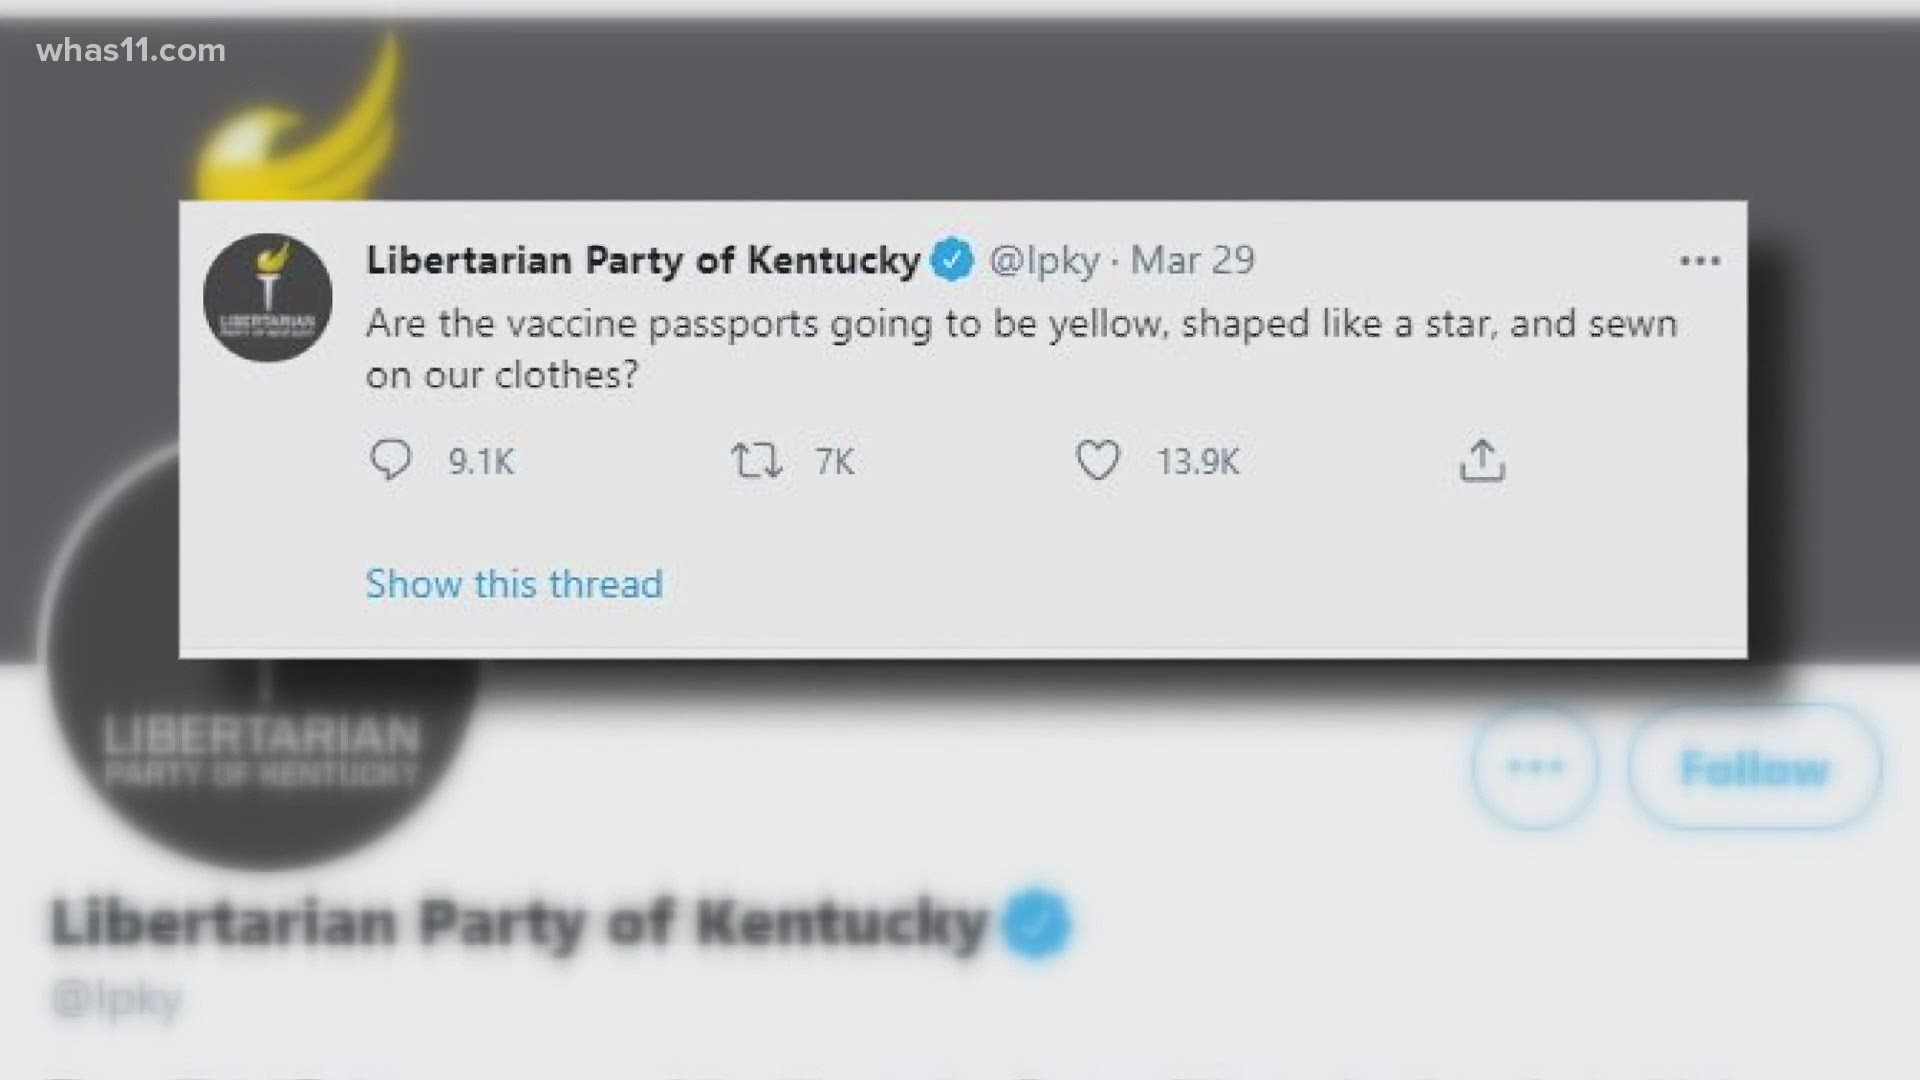 On Wednesday, the Libertarian Party of Kentucky posted a thread on its Twitter page saying it got the comparison backwards, admitting it was insensitive.